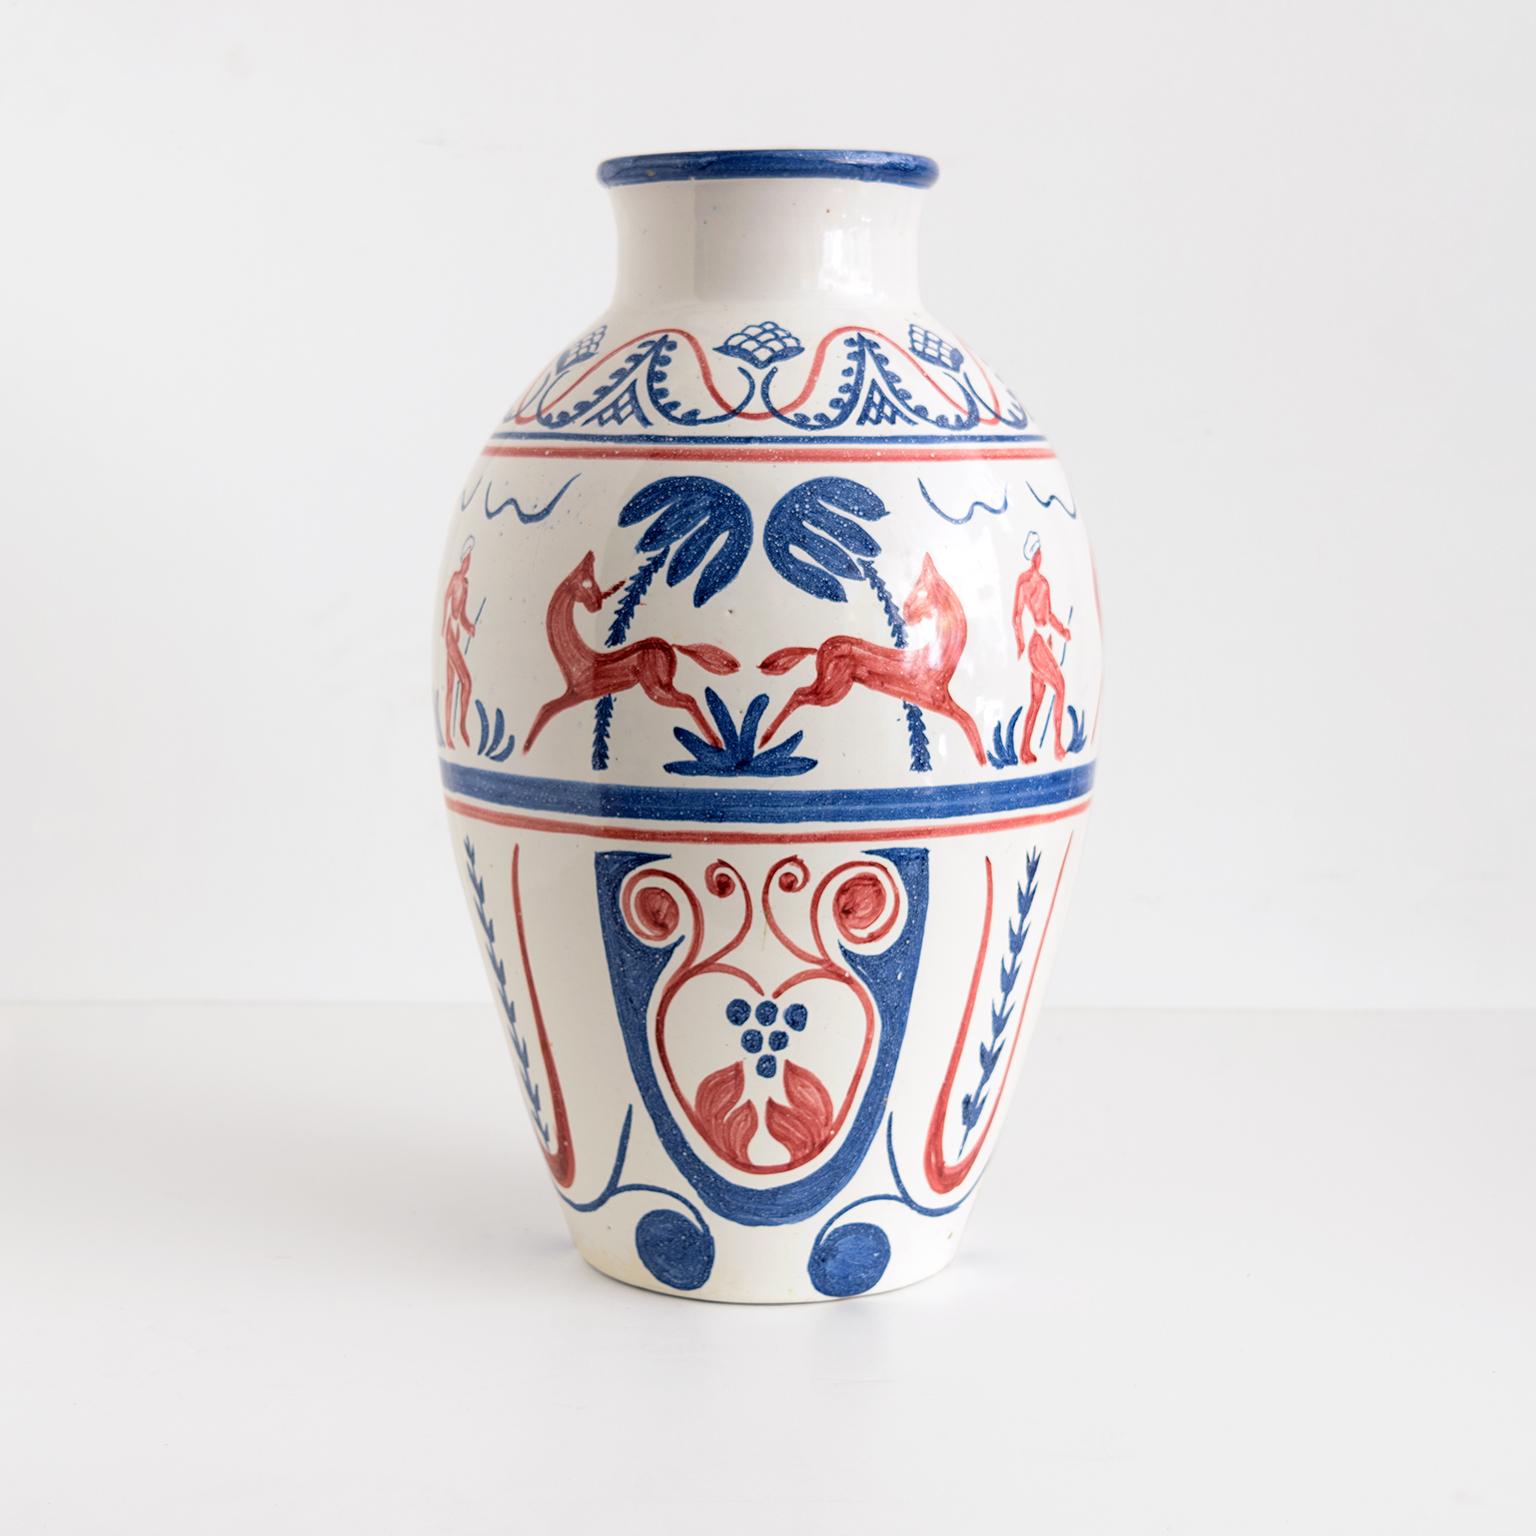 Hand painted figurative ceramic vase on a cream white glazed body, dated 1946. From Hank Keramikk Verksted, Oslo, Norway signed “NK”.

Measures: Height 16”, diameter 10”.